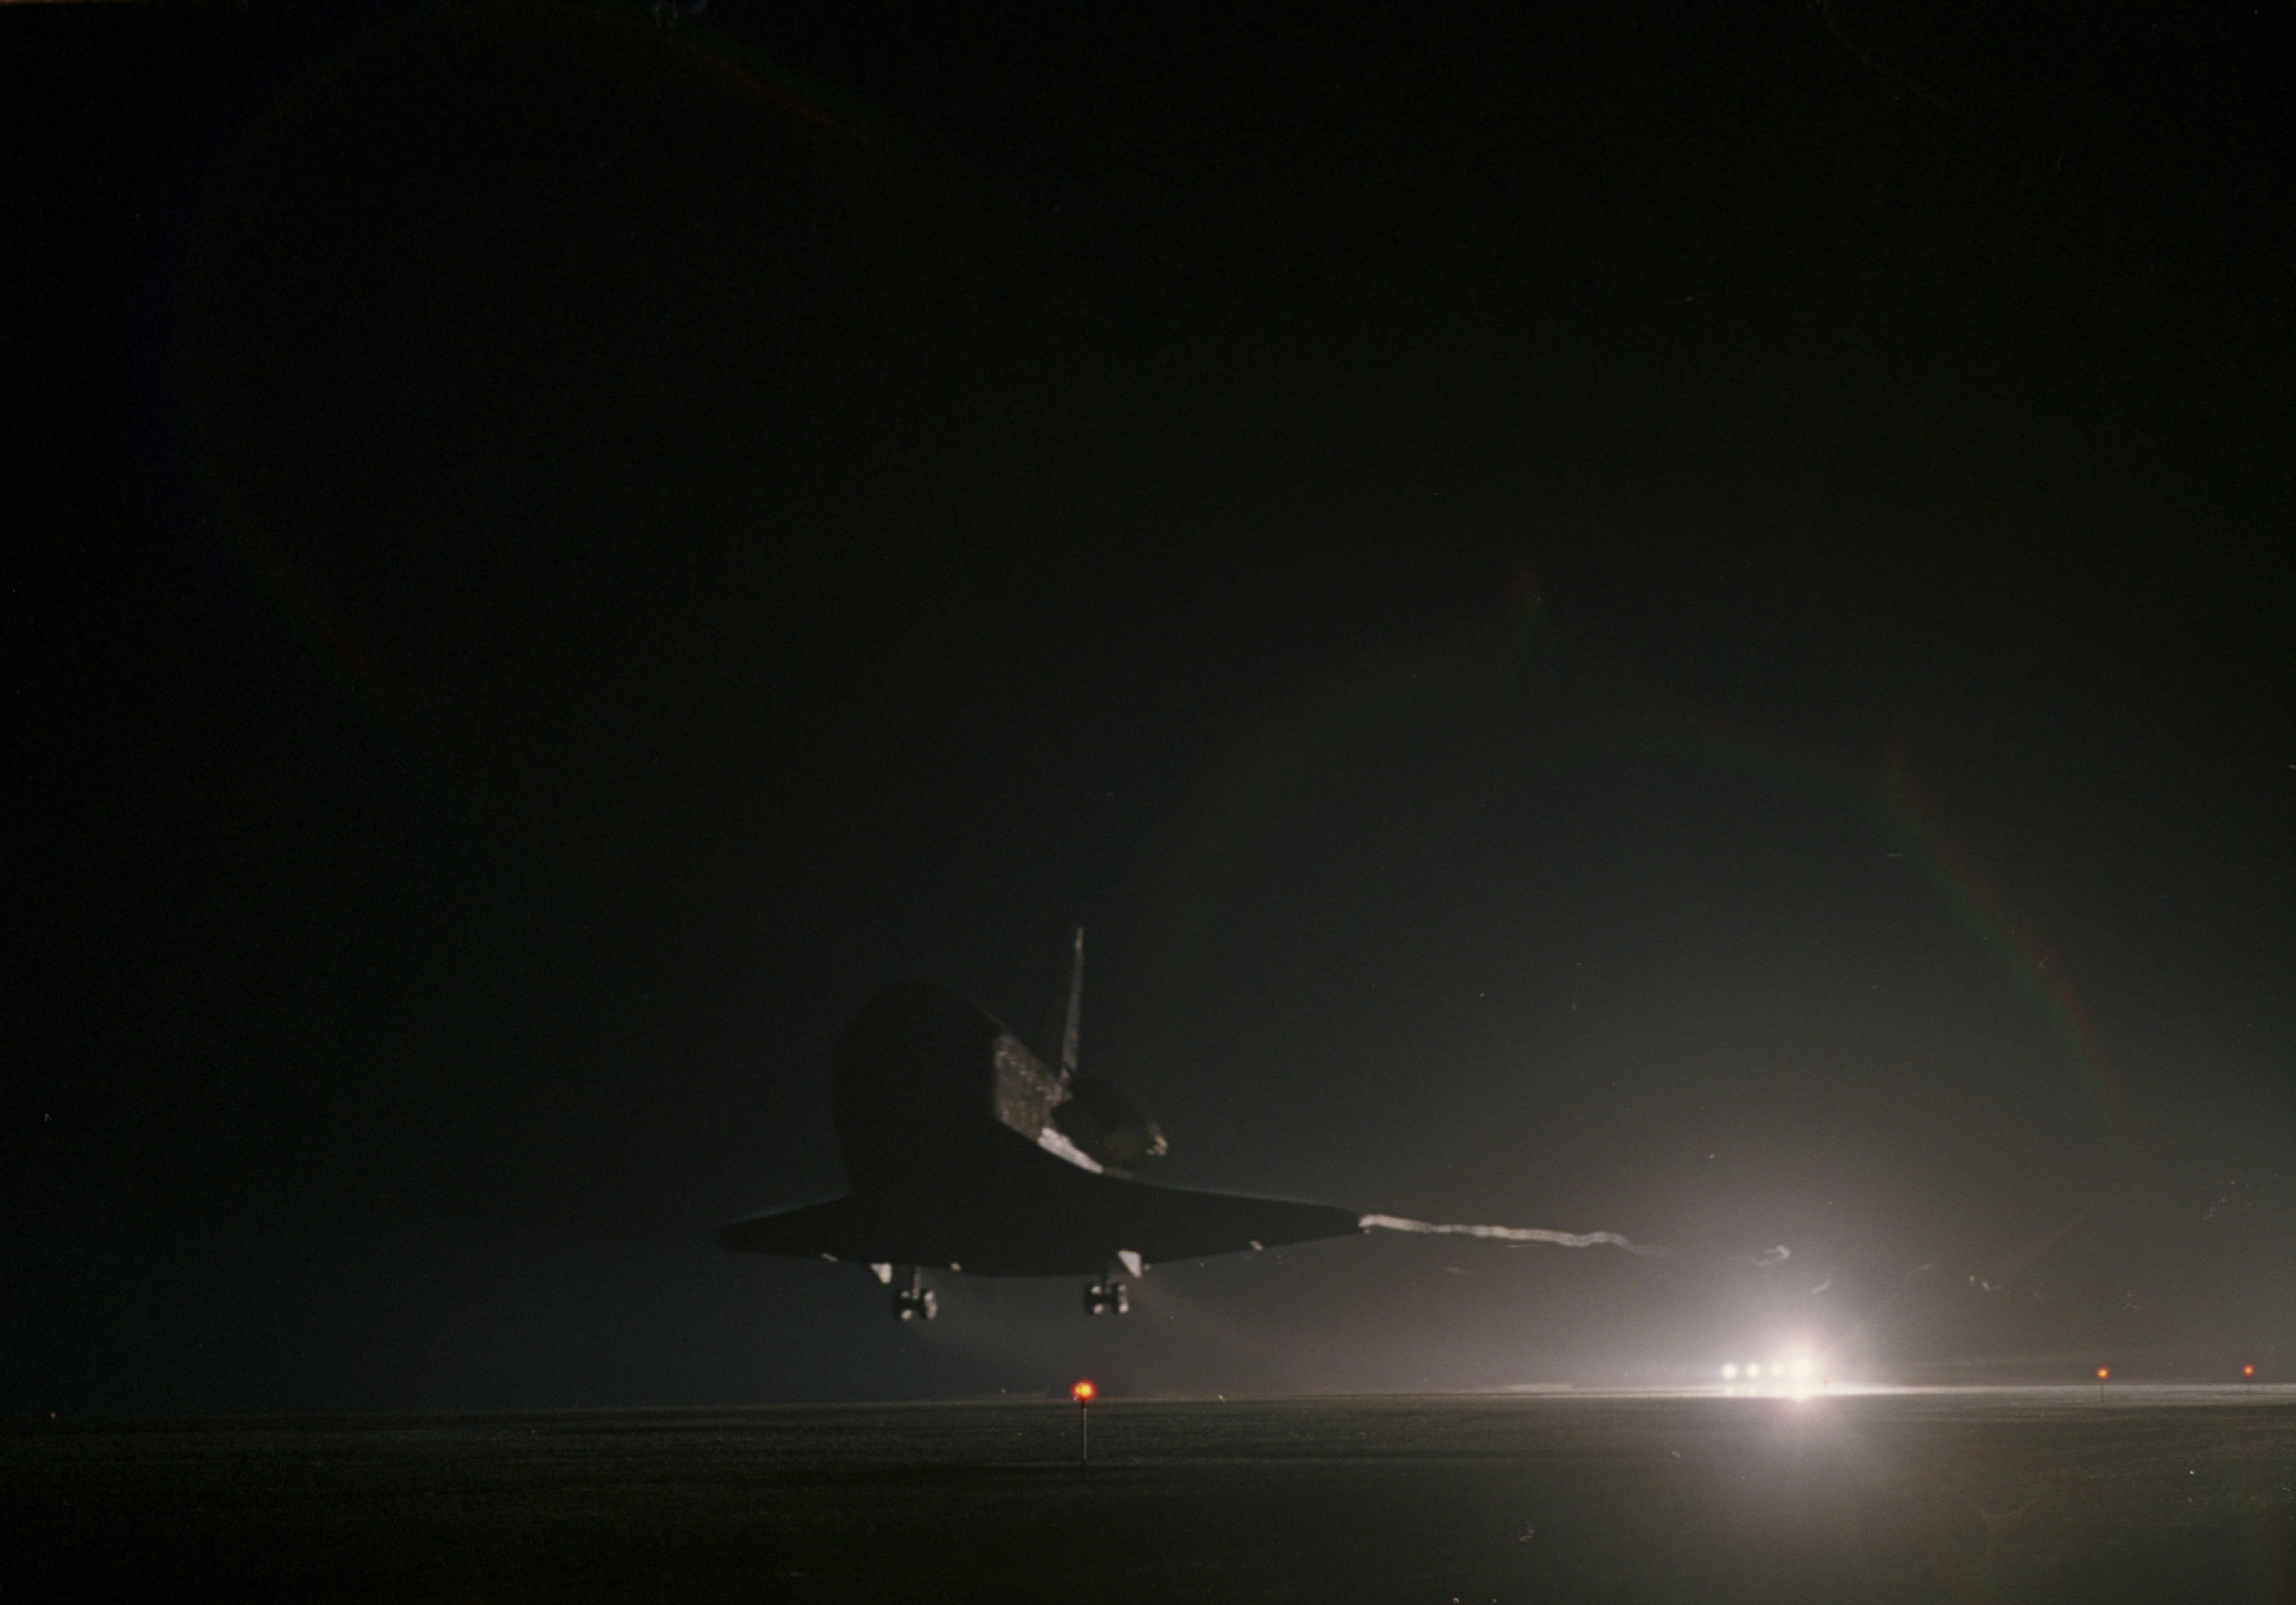 Discovery makes a smooth night landing at NASA’s Kennedy Space Center in Florida.